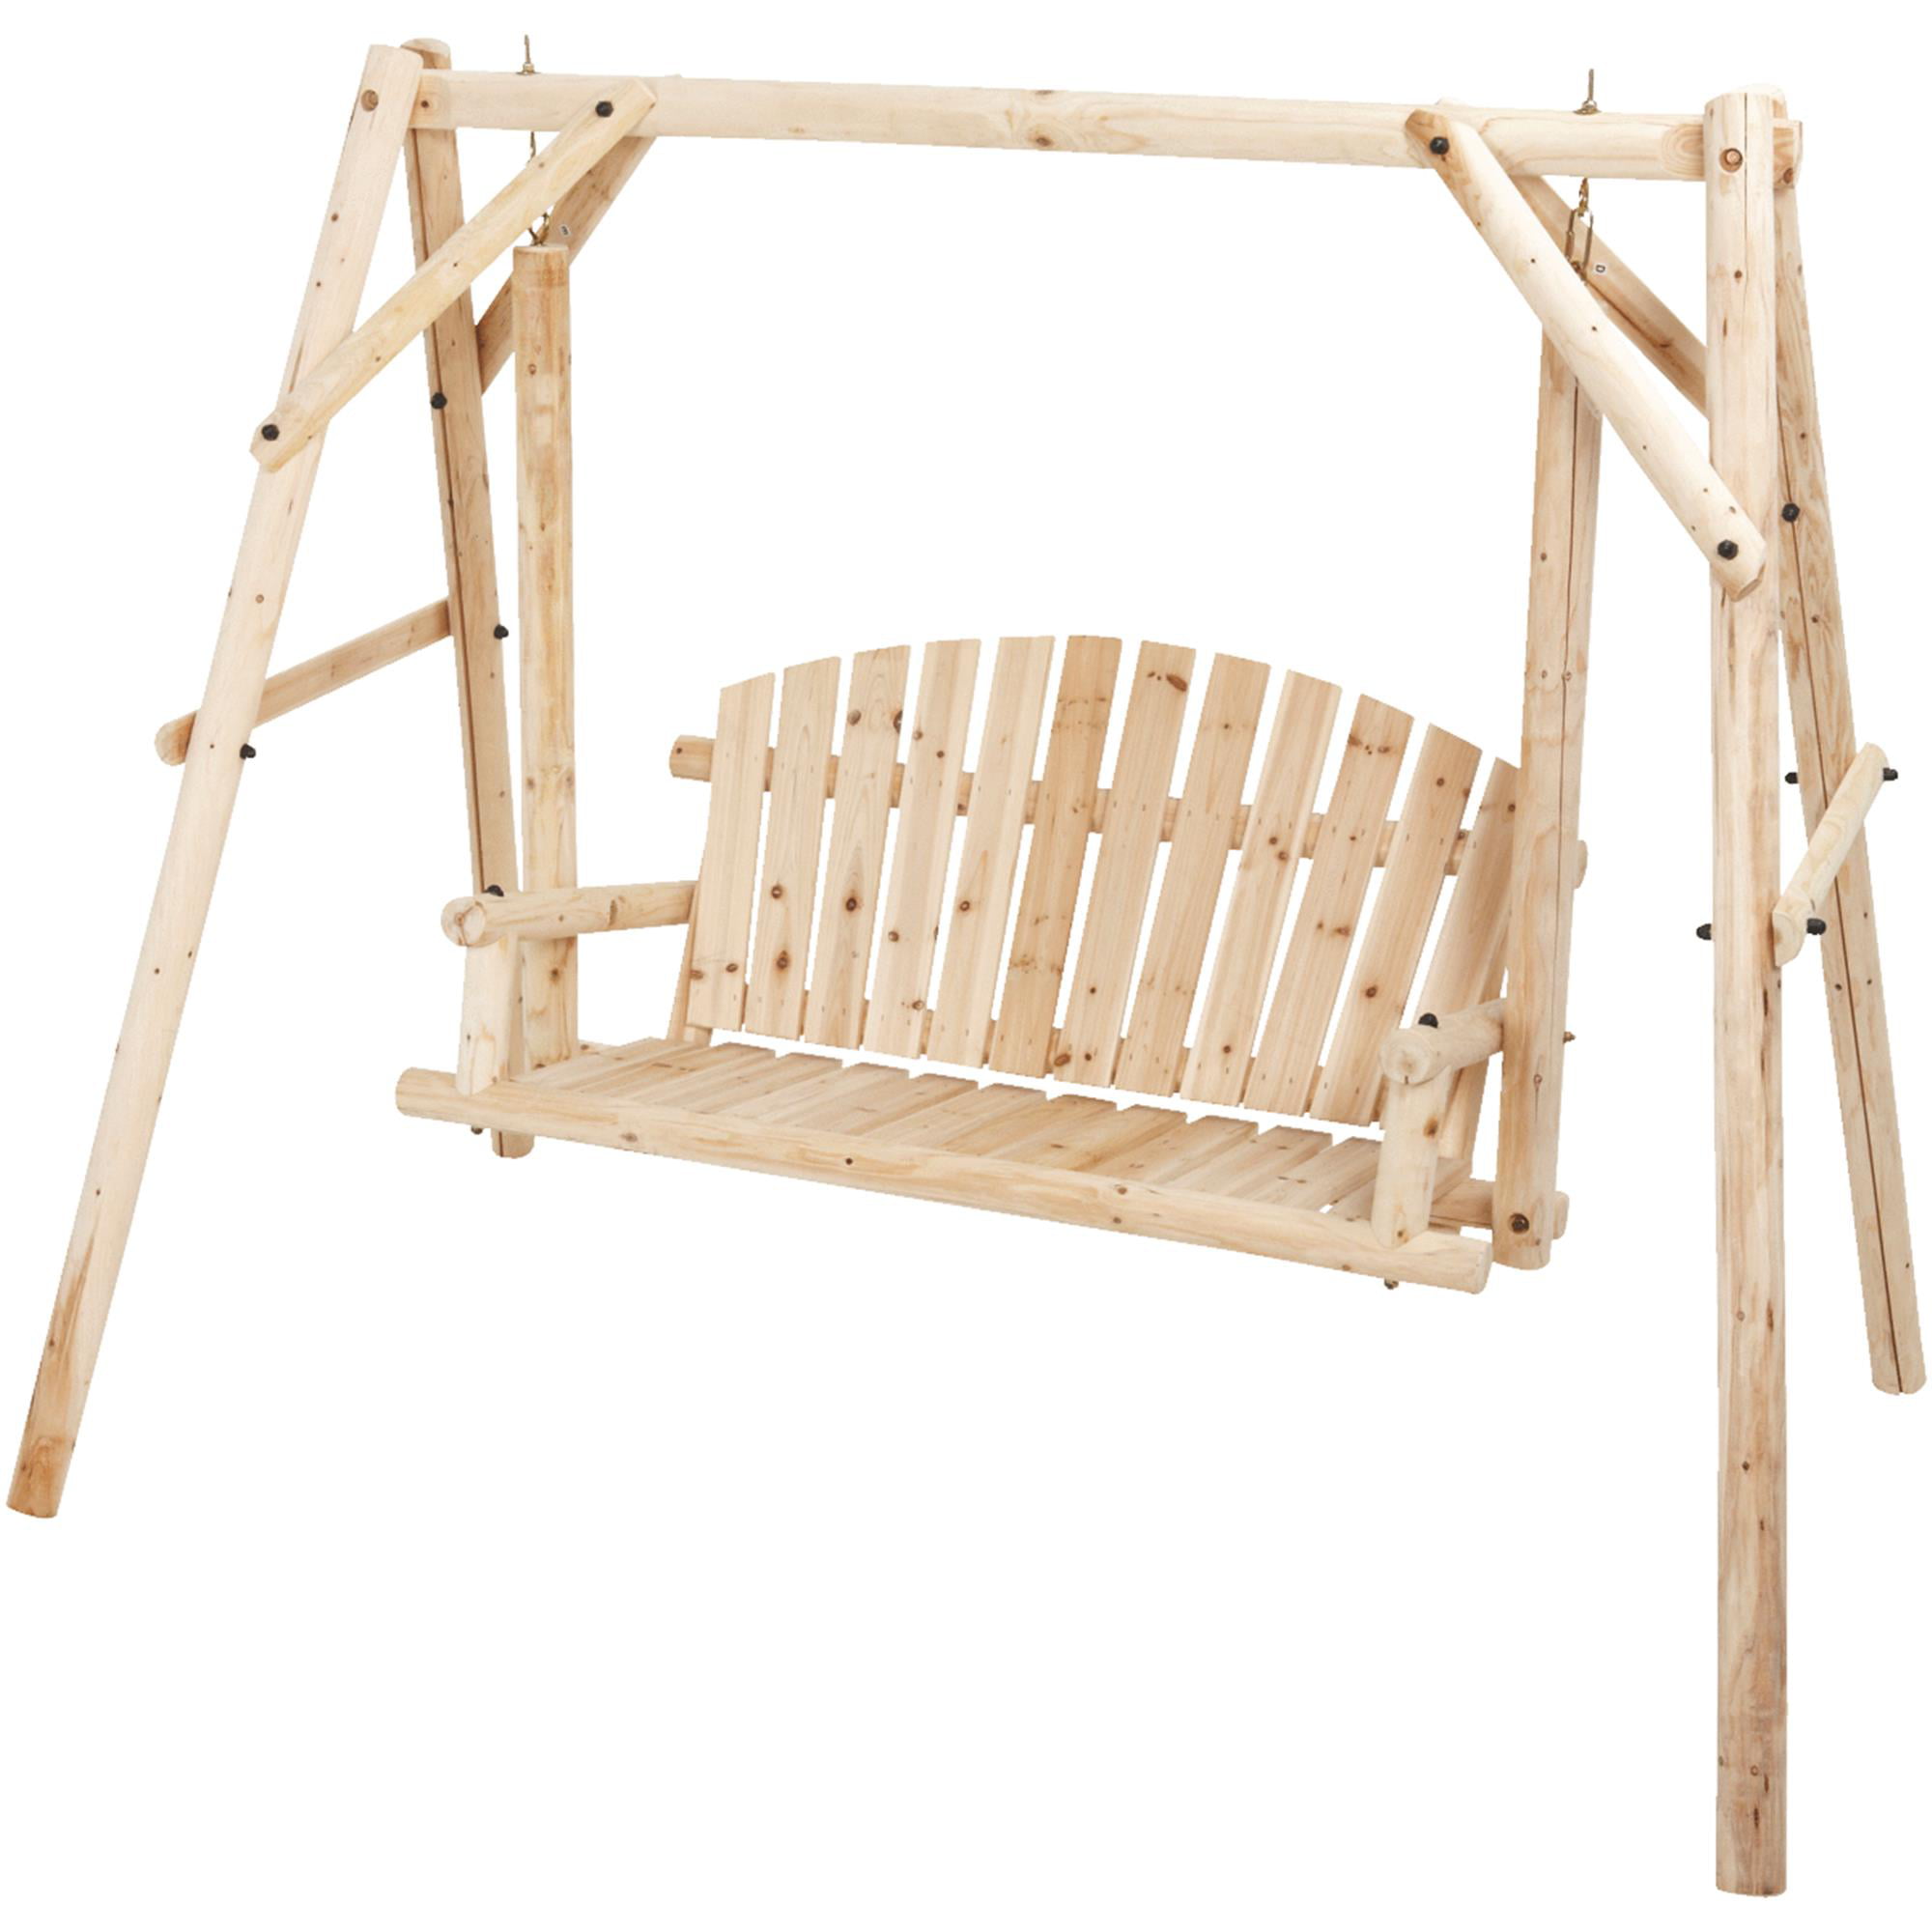 Jack Post North Woods 2Person Log Patio Swing & Frame